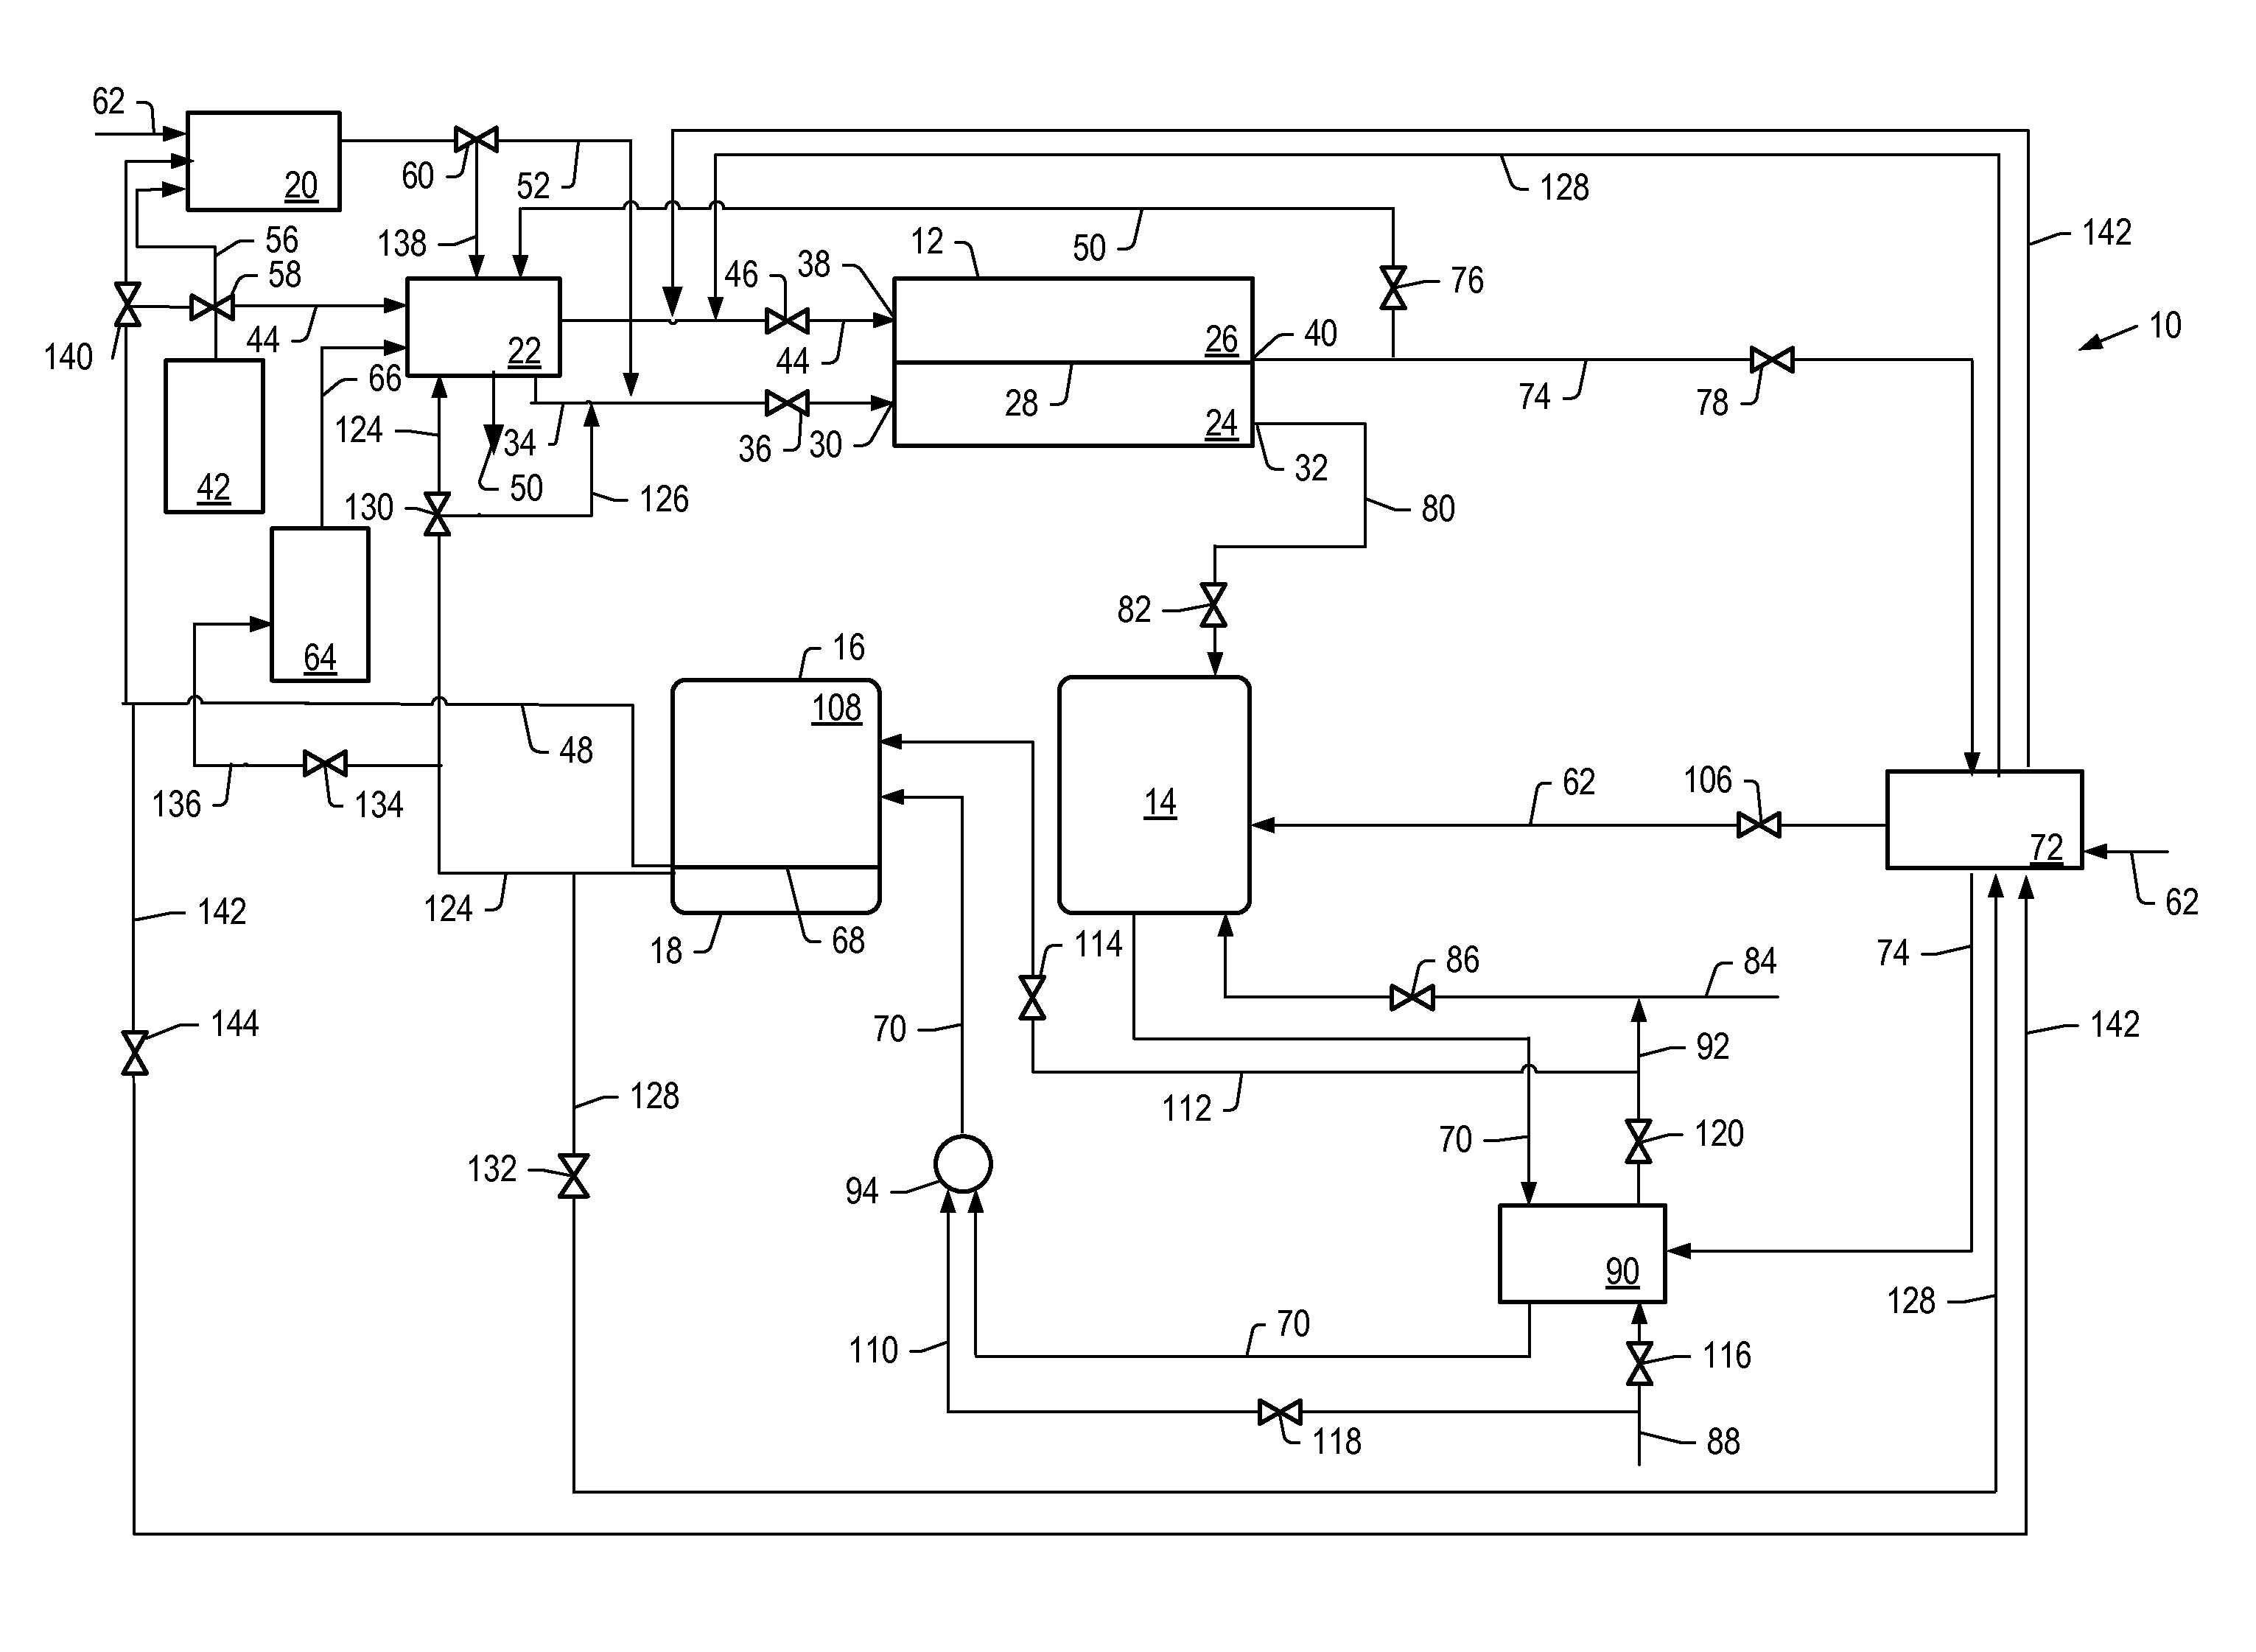 Systems and processes for operating fuel cell systems